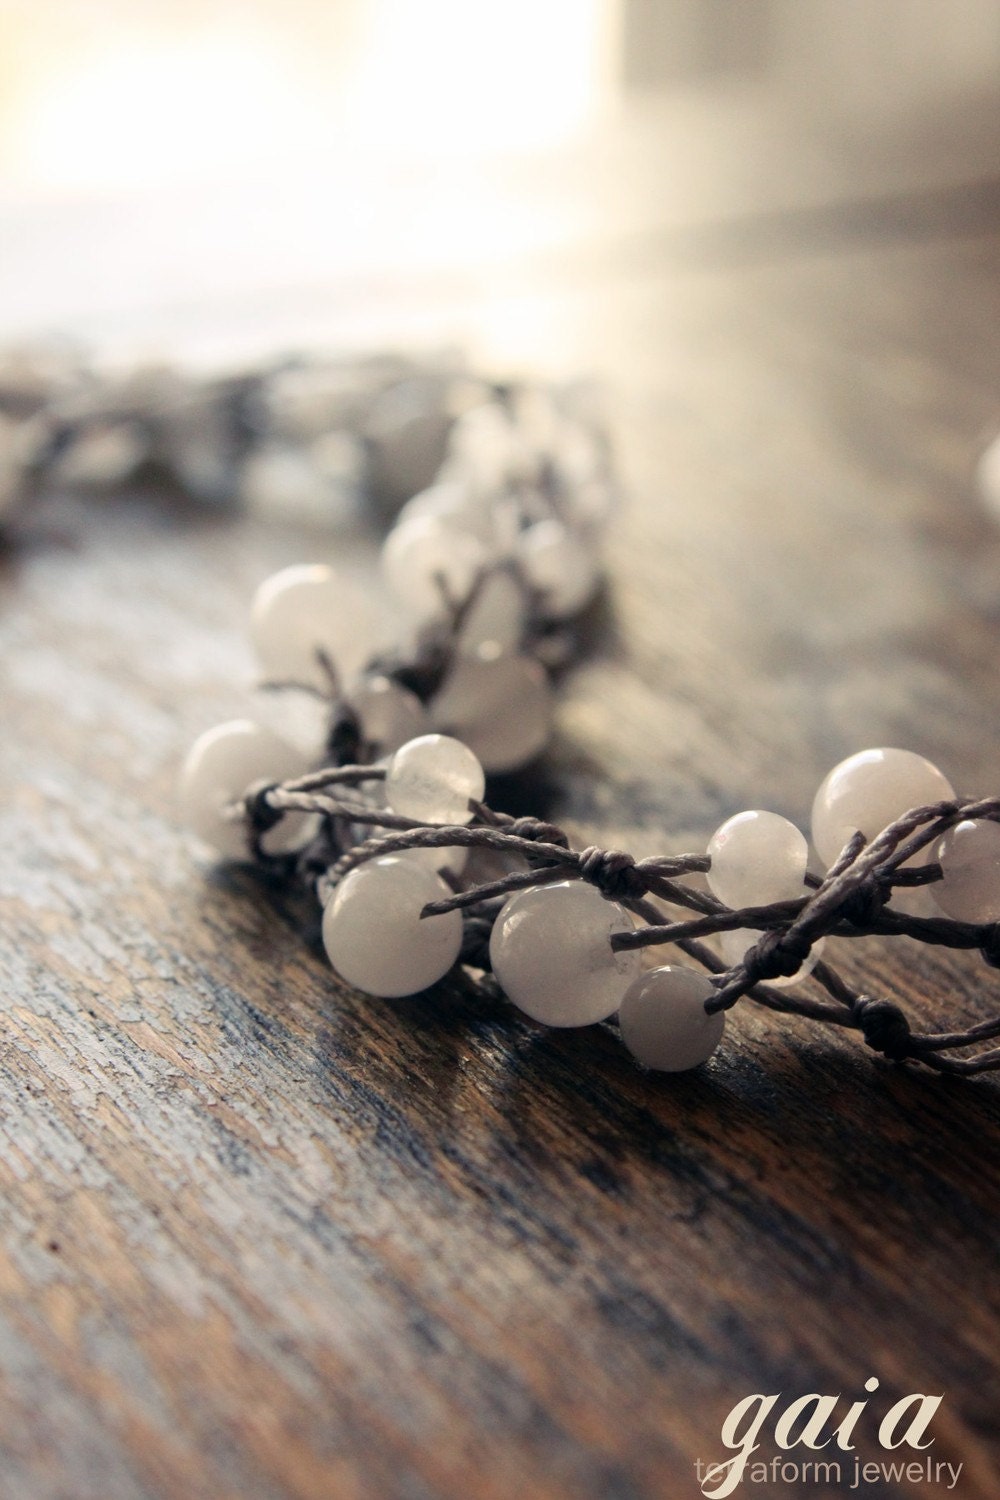 GAIA handmade necklace (long) - snow quartz and warm gray knotted cord.